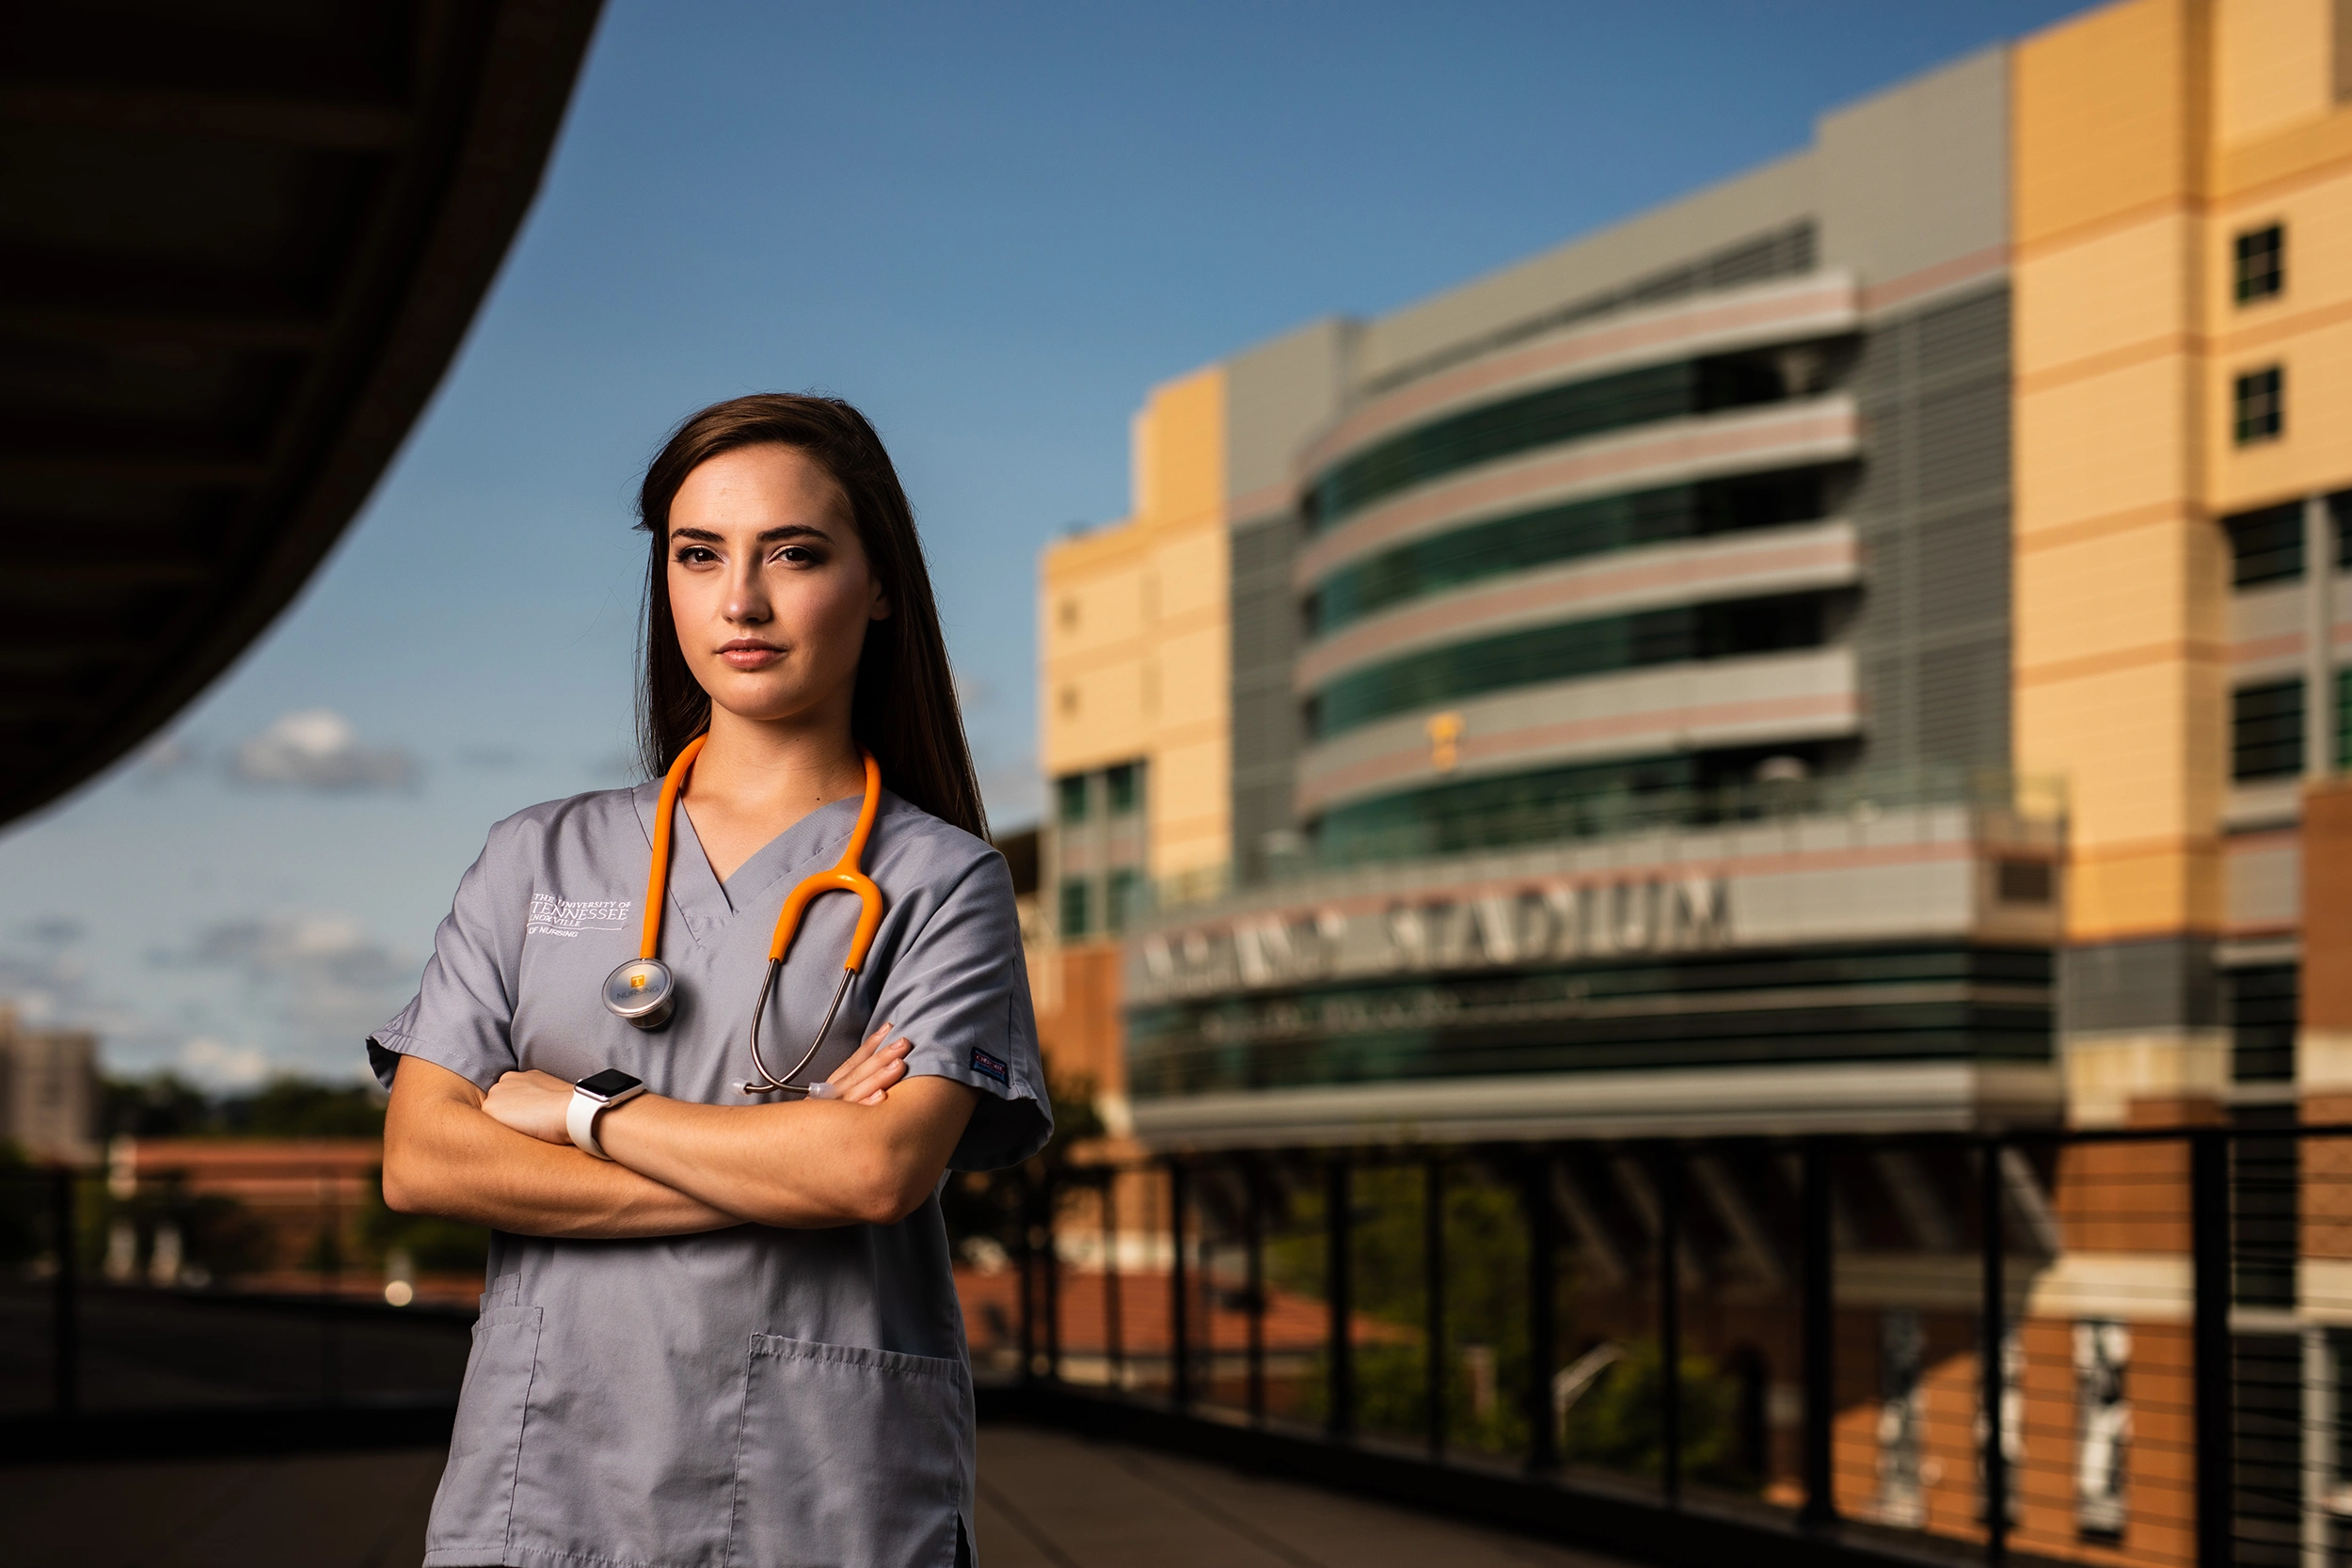 A woman in scrubs with a stethoscope around her neck posing in front of Neyland Stadium for a photo